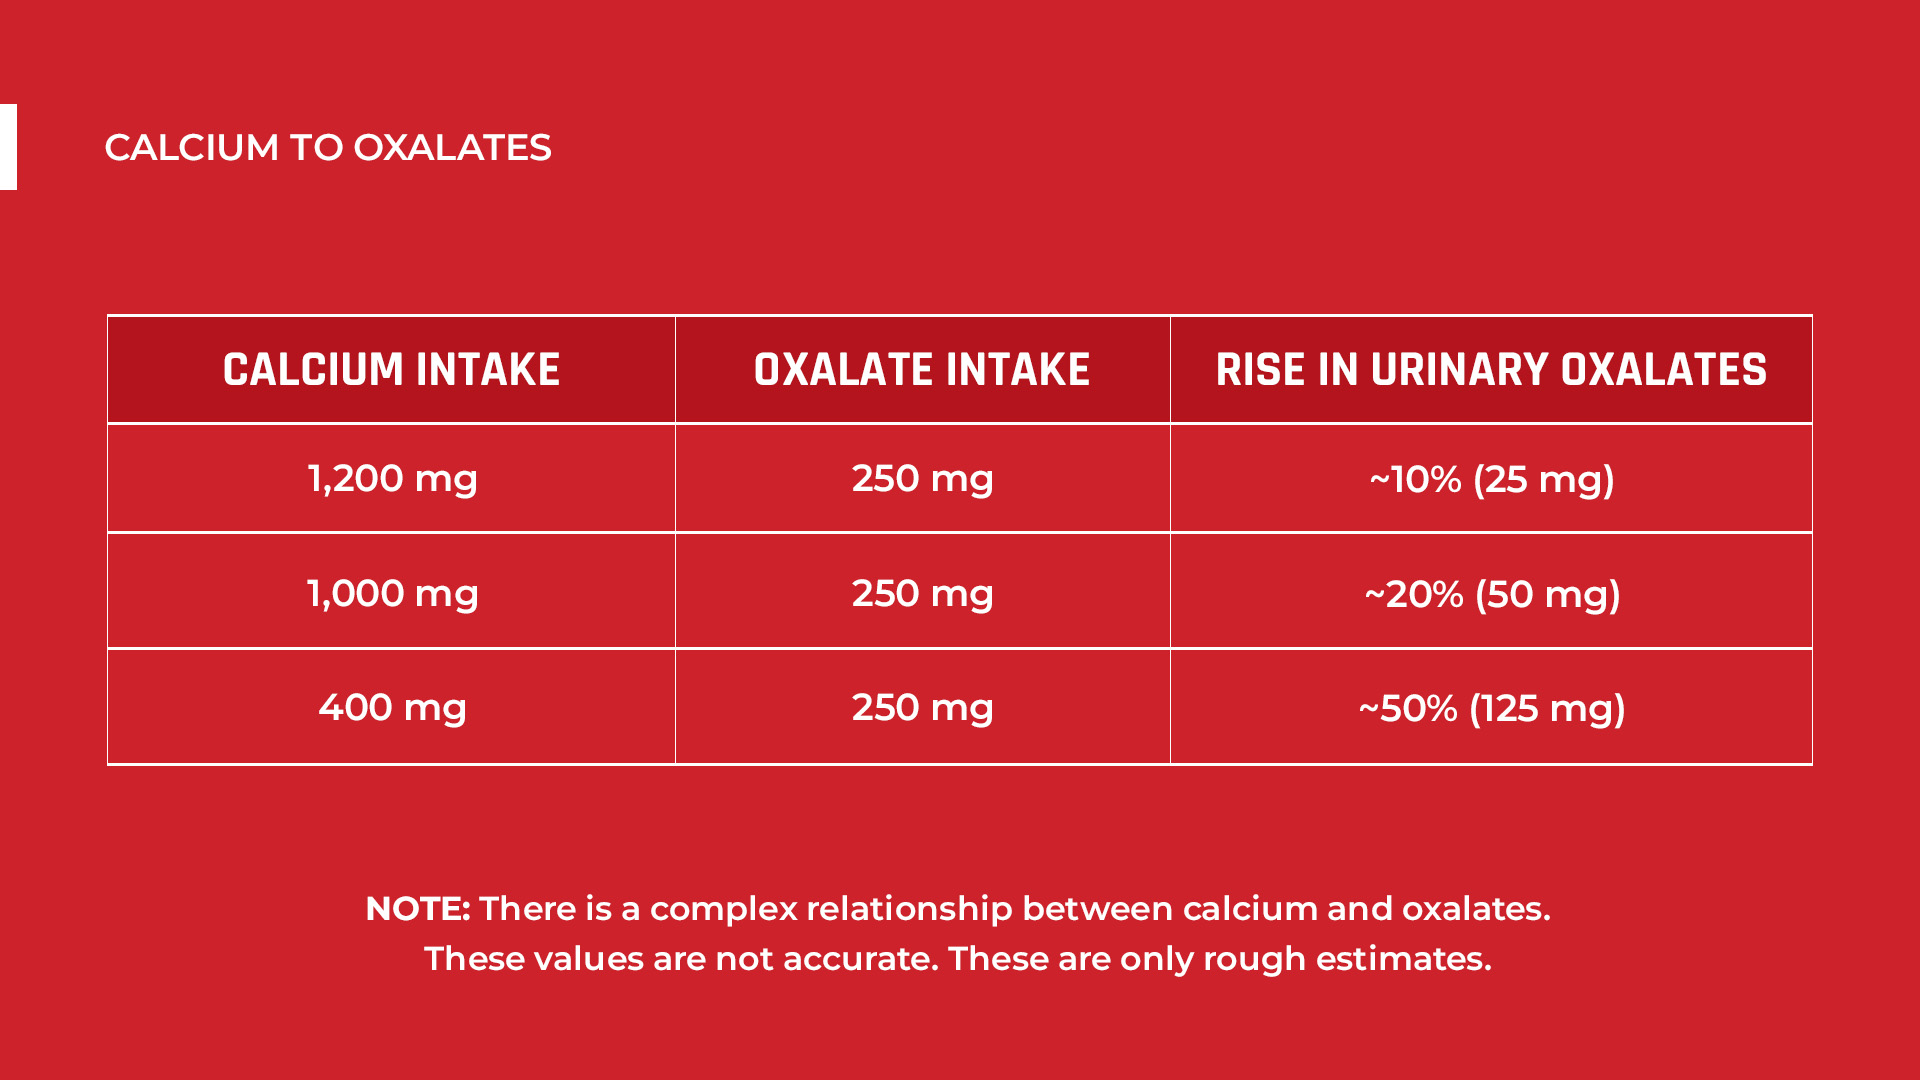 Rise in Urinary Oxalates in Relation to Calcium and Oxalate Intake